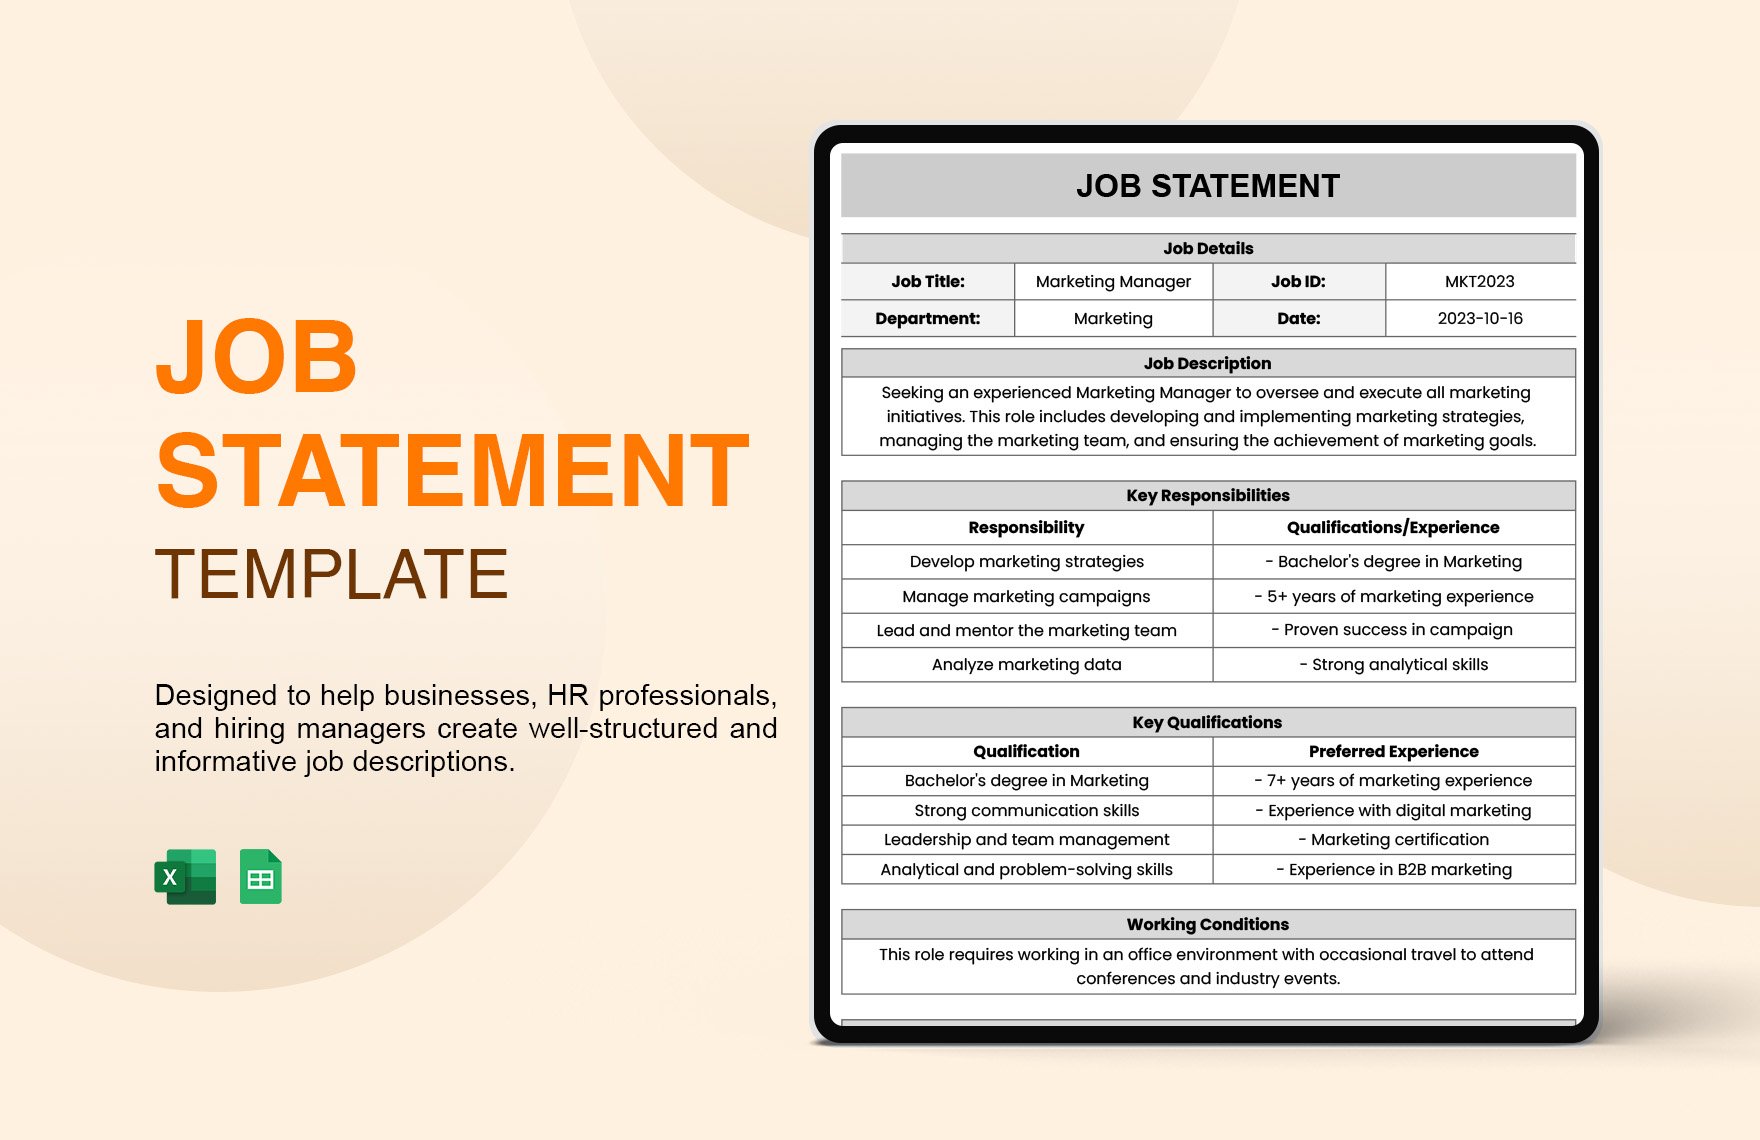 Free Job Statement Template in Excel, Google Sheets